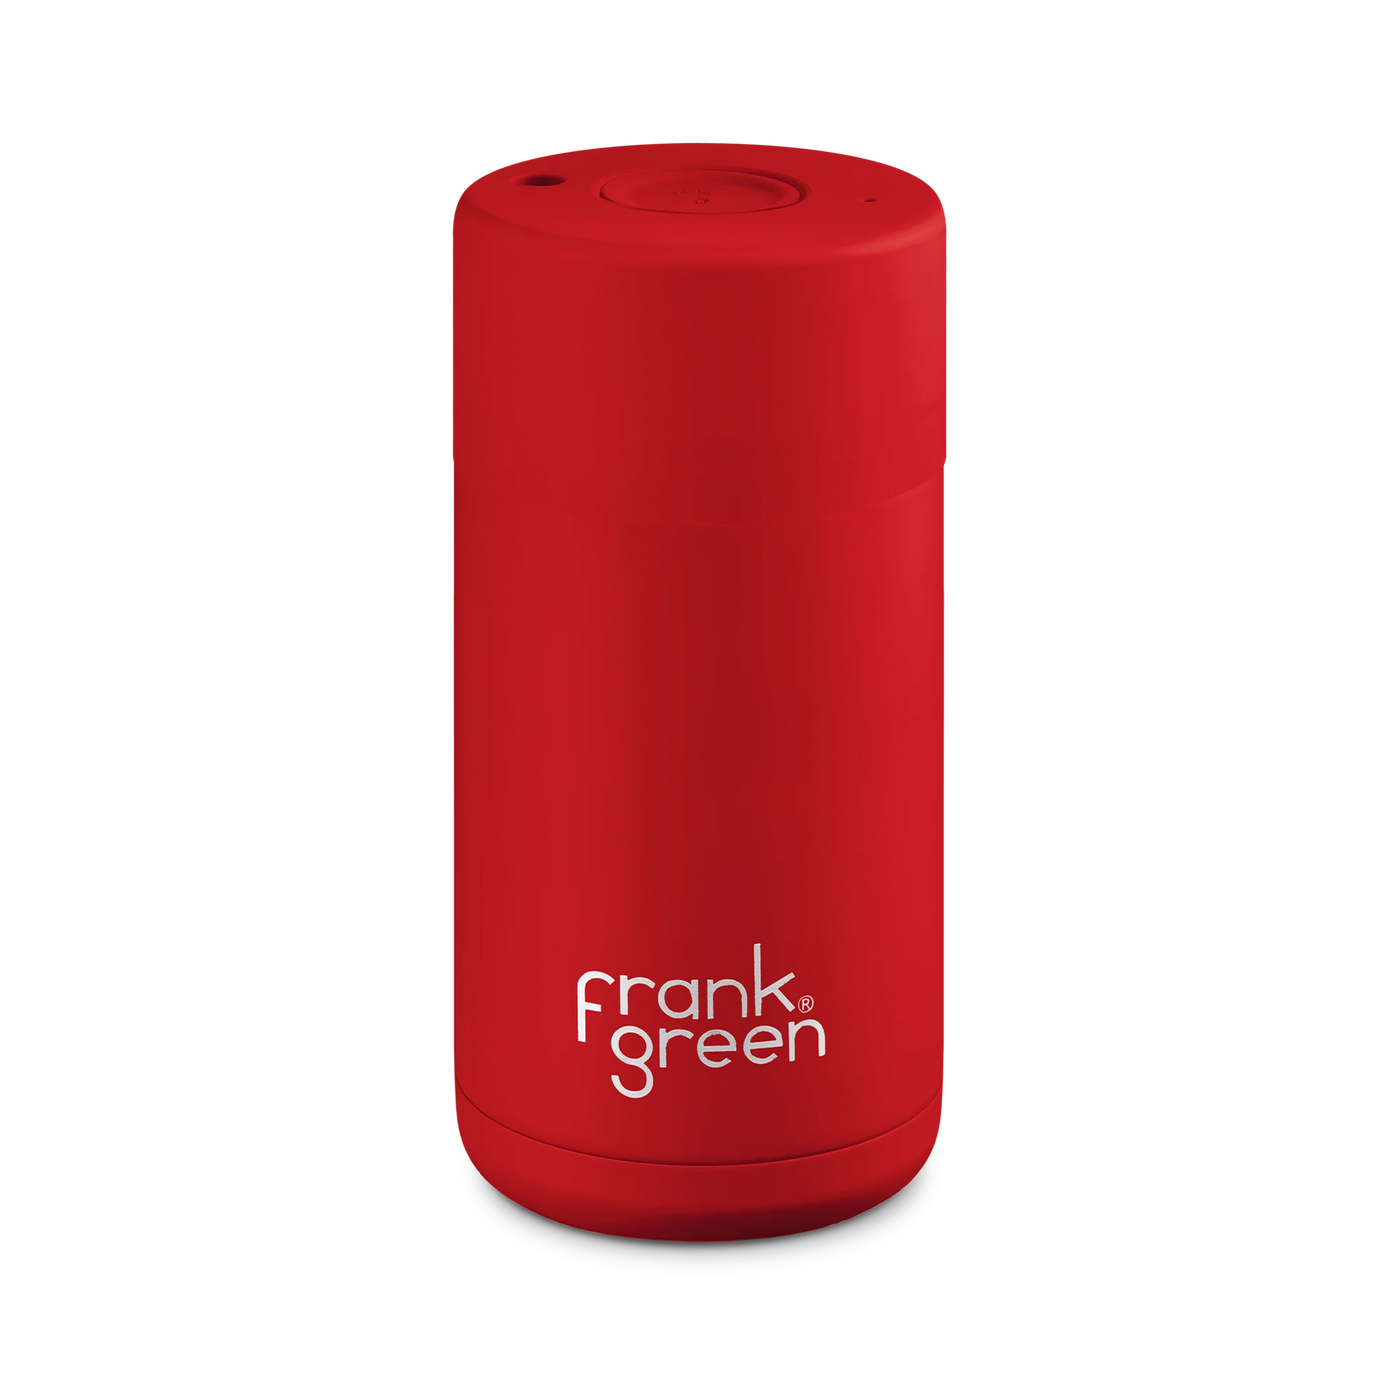 Frank Green Limited Edition Ceramic Reusable Cup 12oz - Atomic Red Mealtime Frank Green 